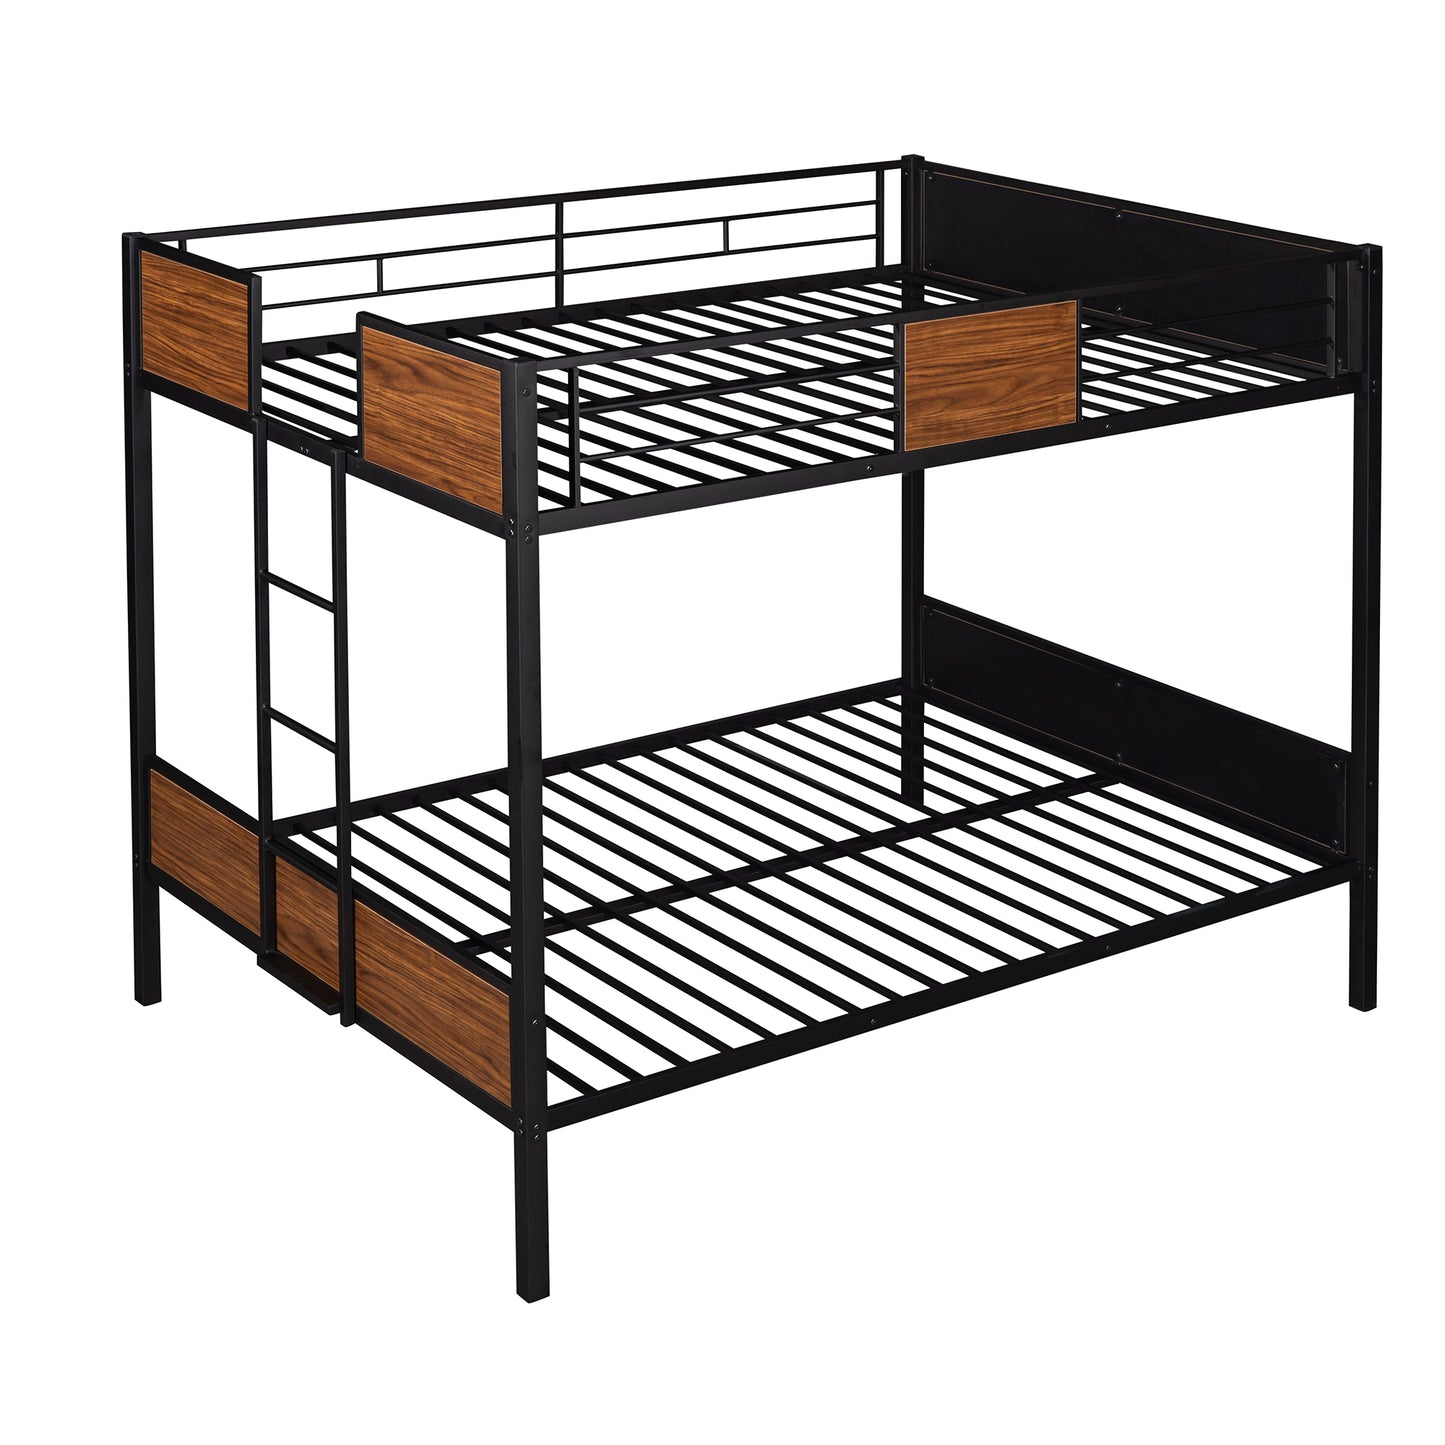 Full-over-full bunk bed modern style steel frame bunk bed with safety rail